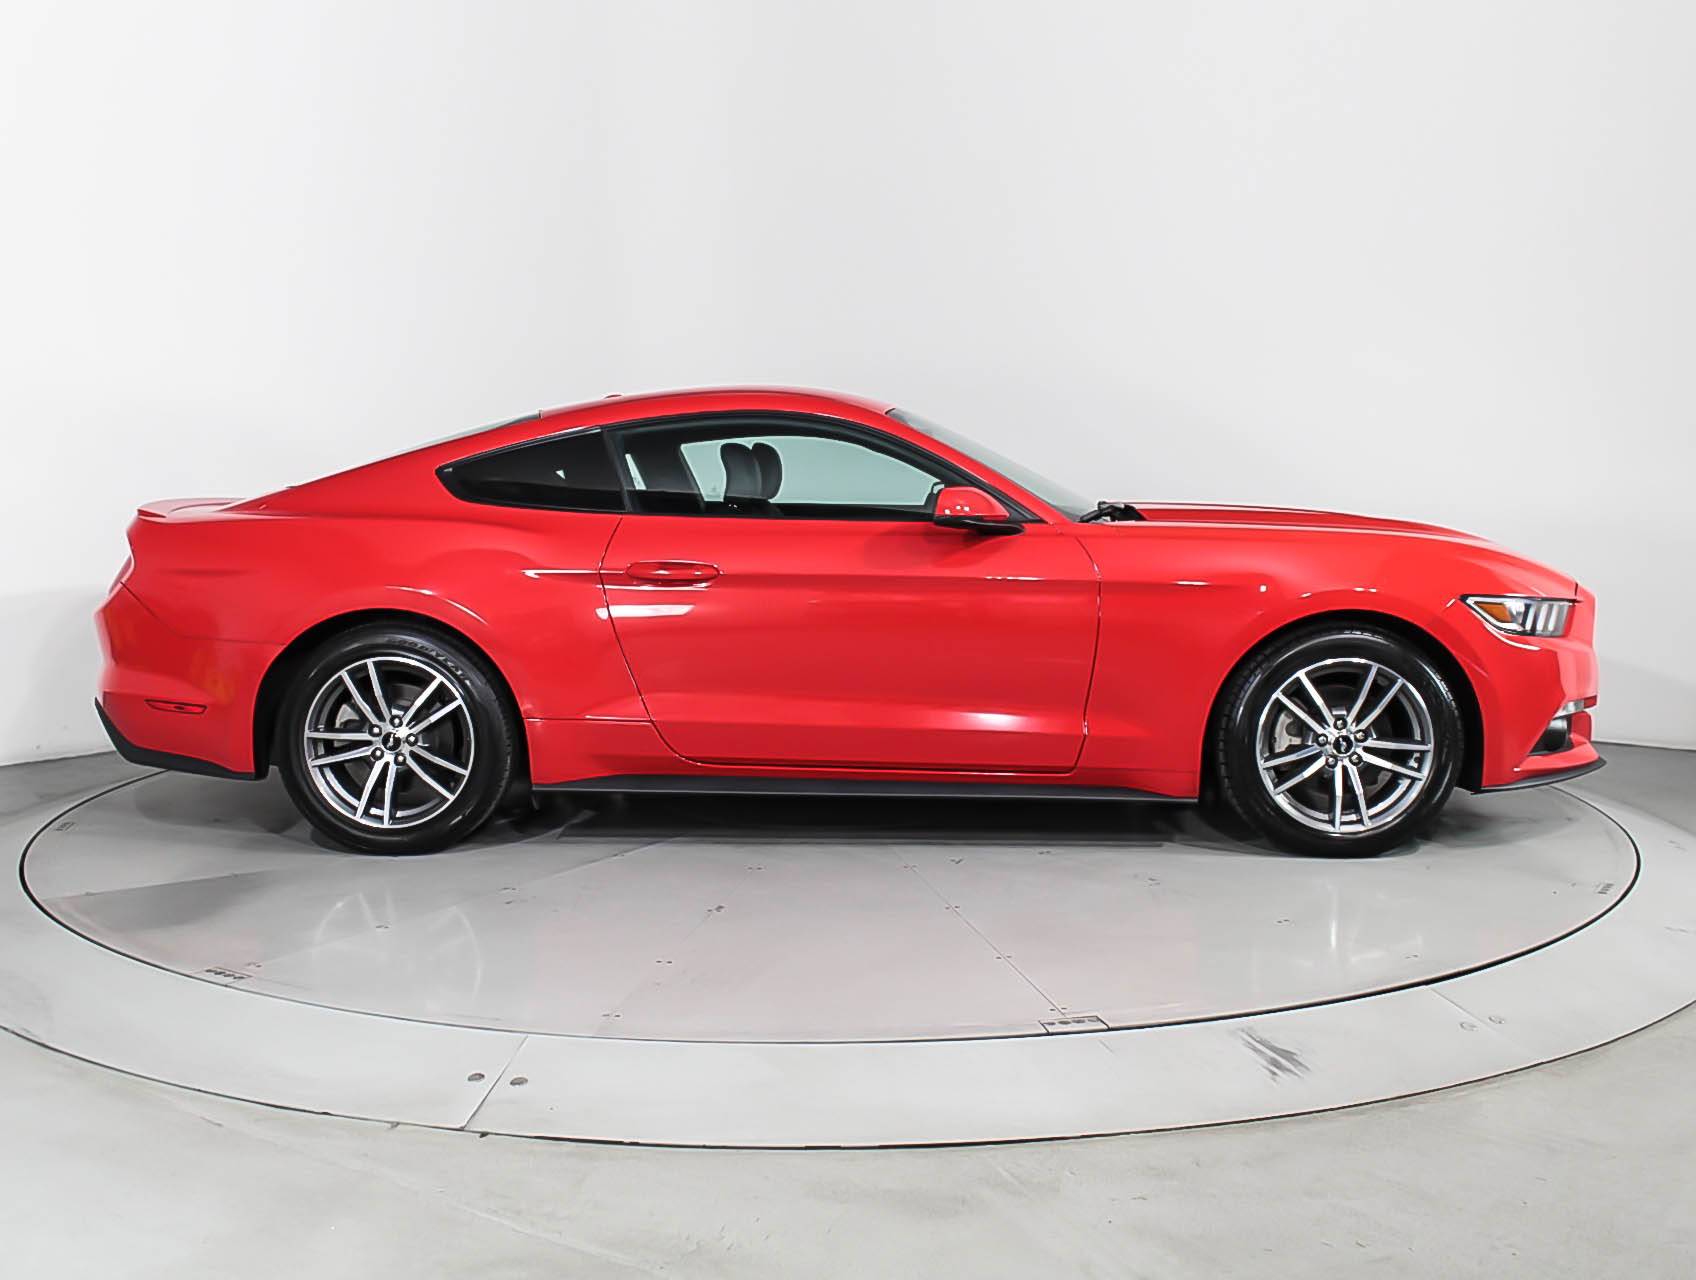 Florida Fine Cars - Used FORD MUSTANG 2015 HOLLYWOOD Ecoboost Premium